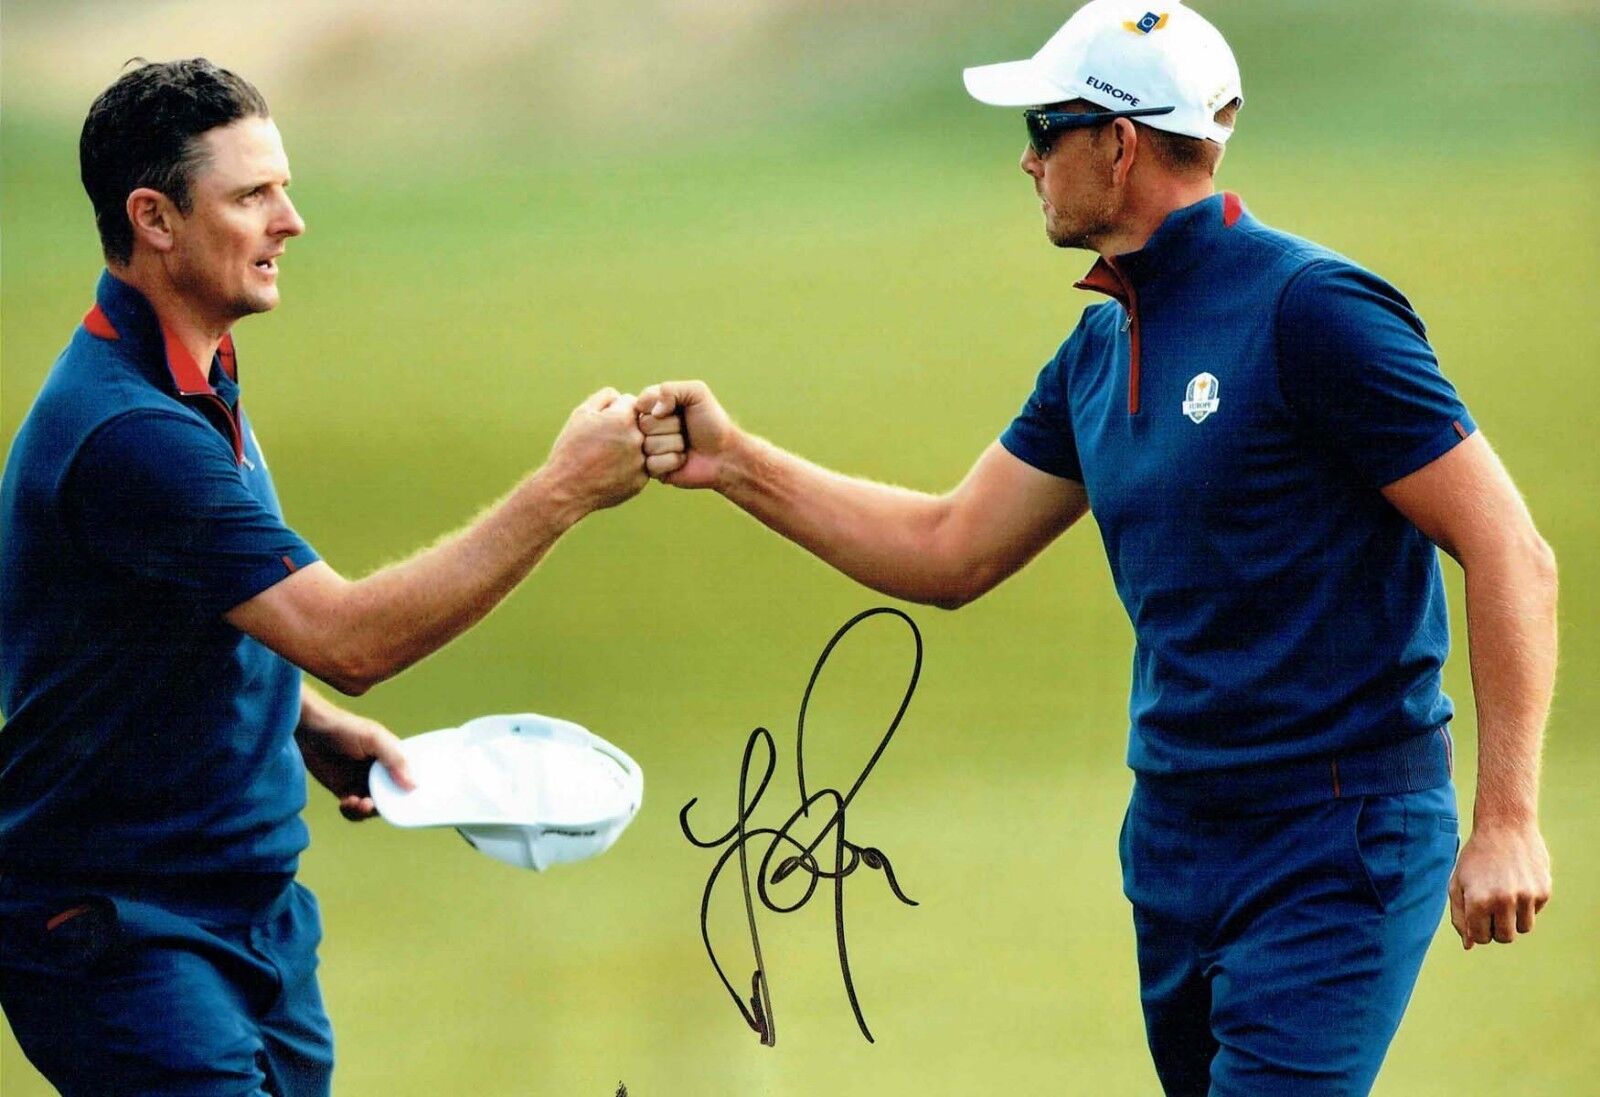 Justin ROSE SIGNED 12x8 Photo Poster painting 1 AFTAL Autograph COA Golf Ryder Cup Winner 2018